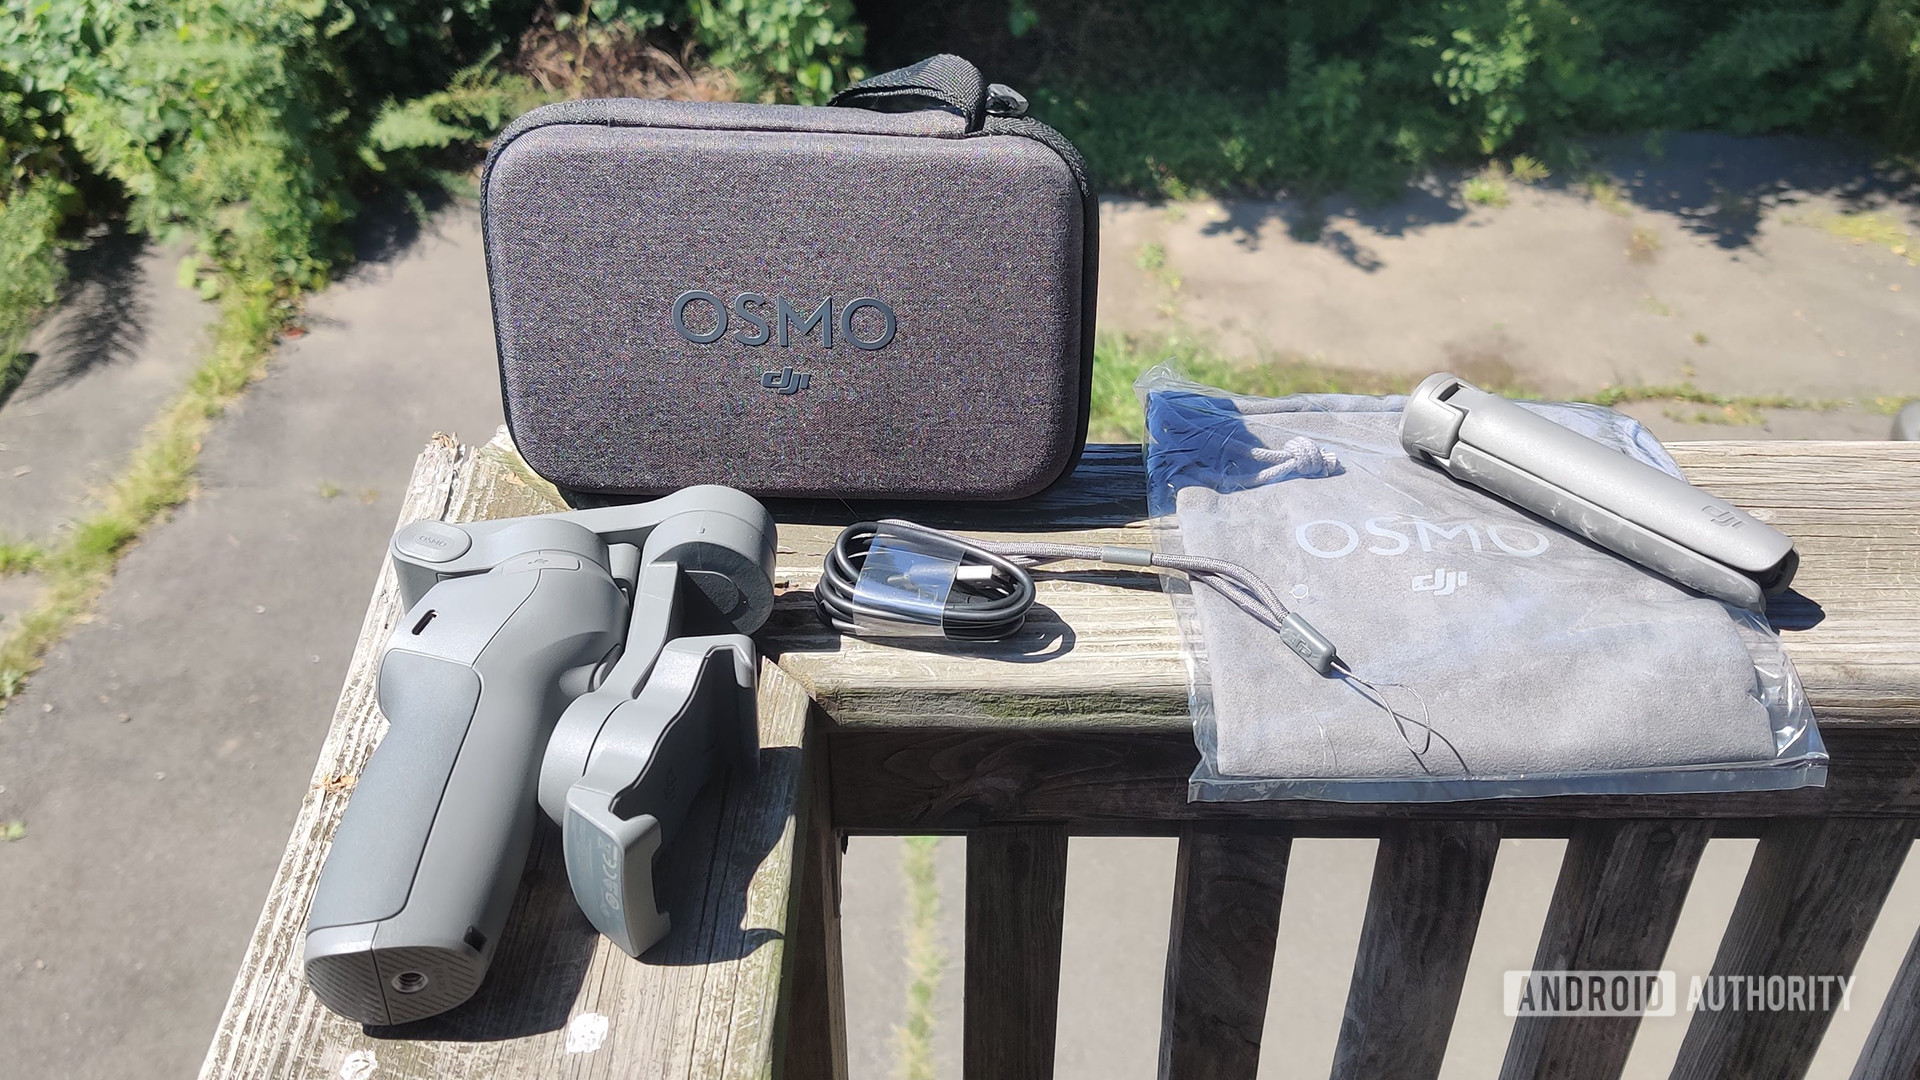 DJI Osmo Mobile 3 items that are included in the box.